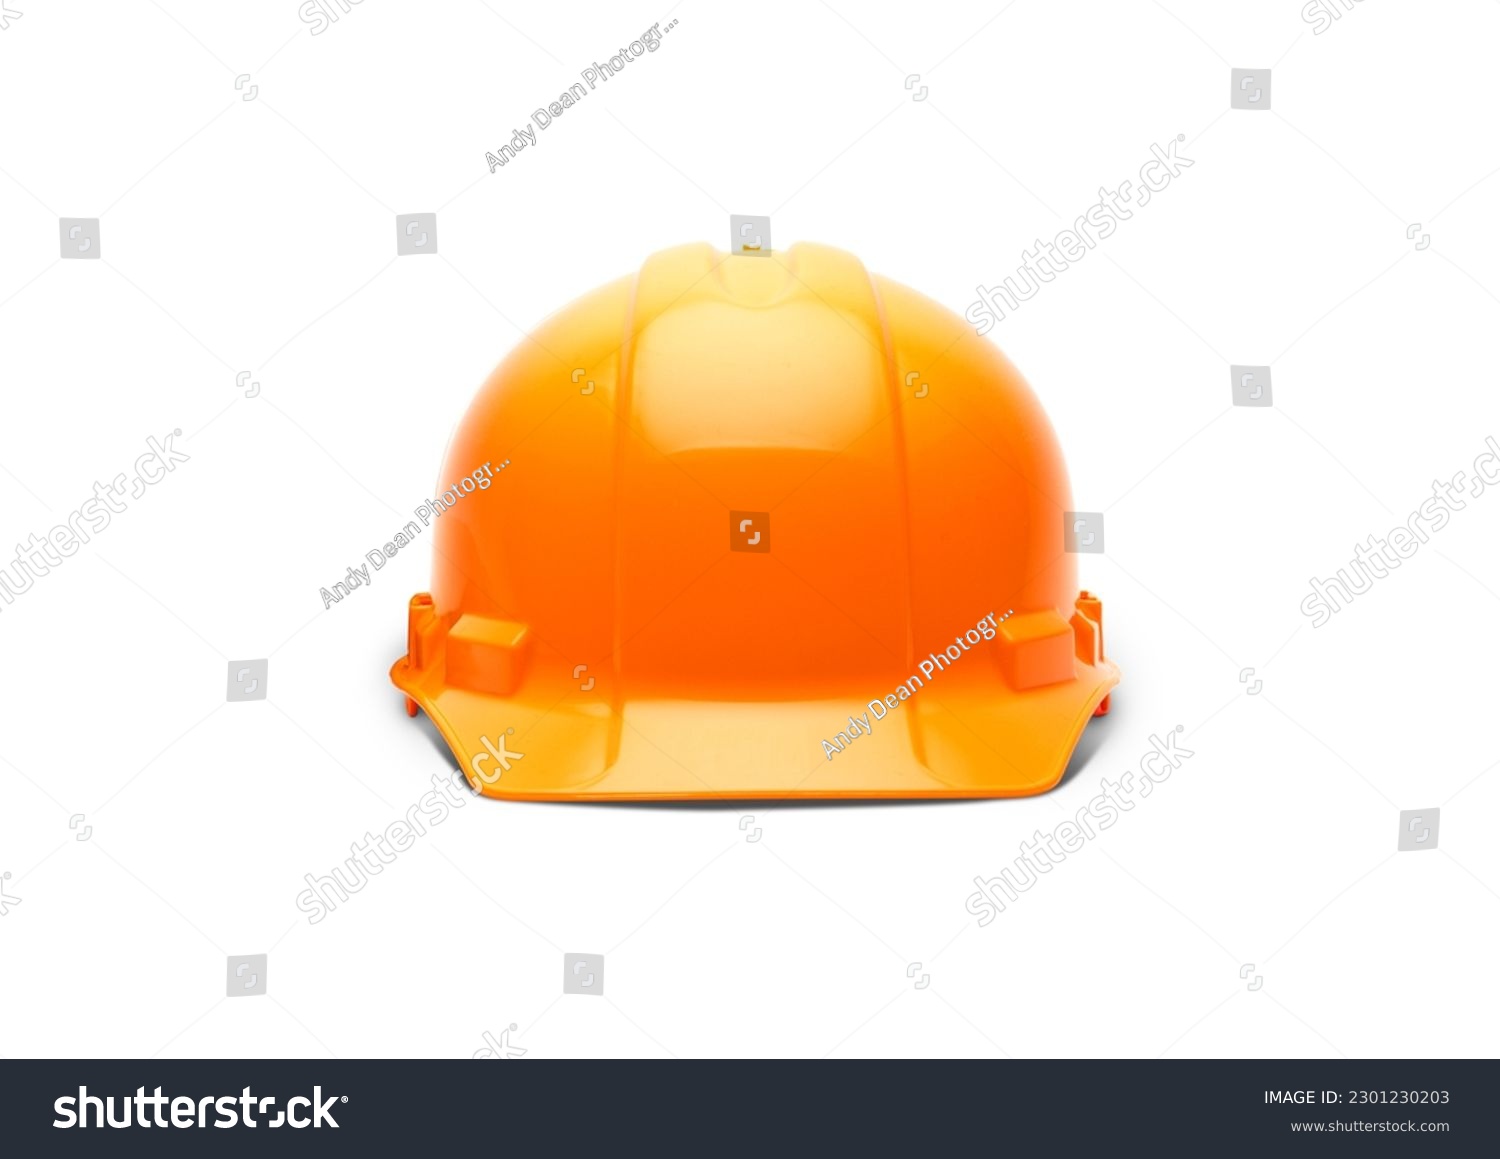 Orange Construction Safety Hard Hat Facing Forward Isolated on White Ready for Your Logo. #2301230203